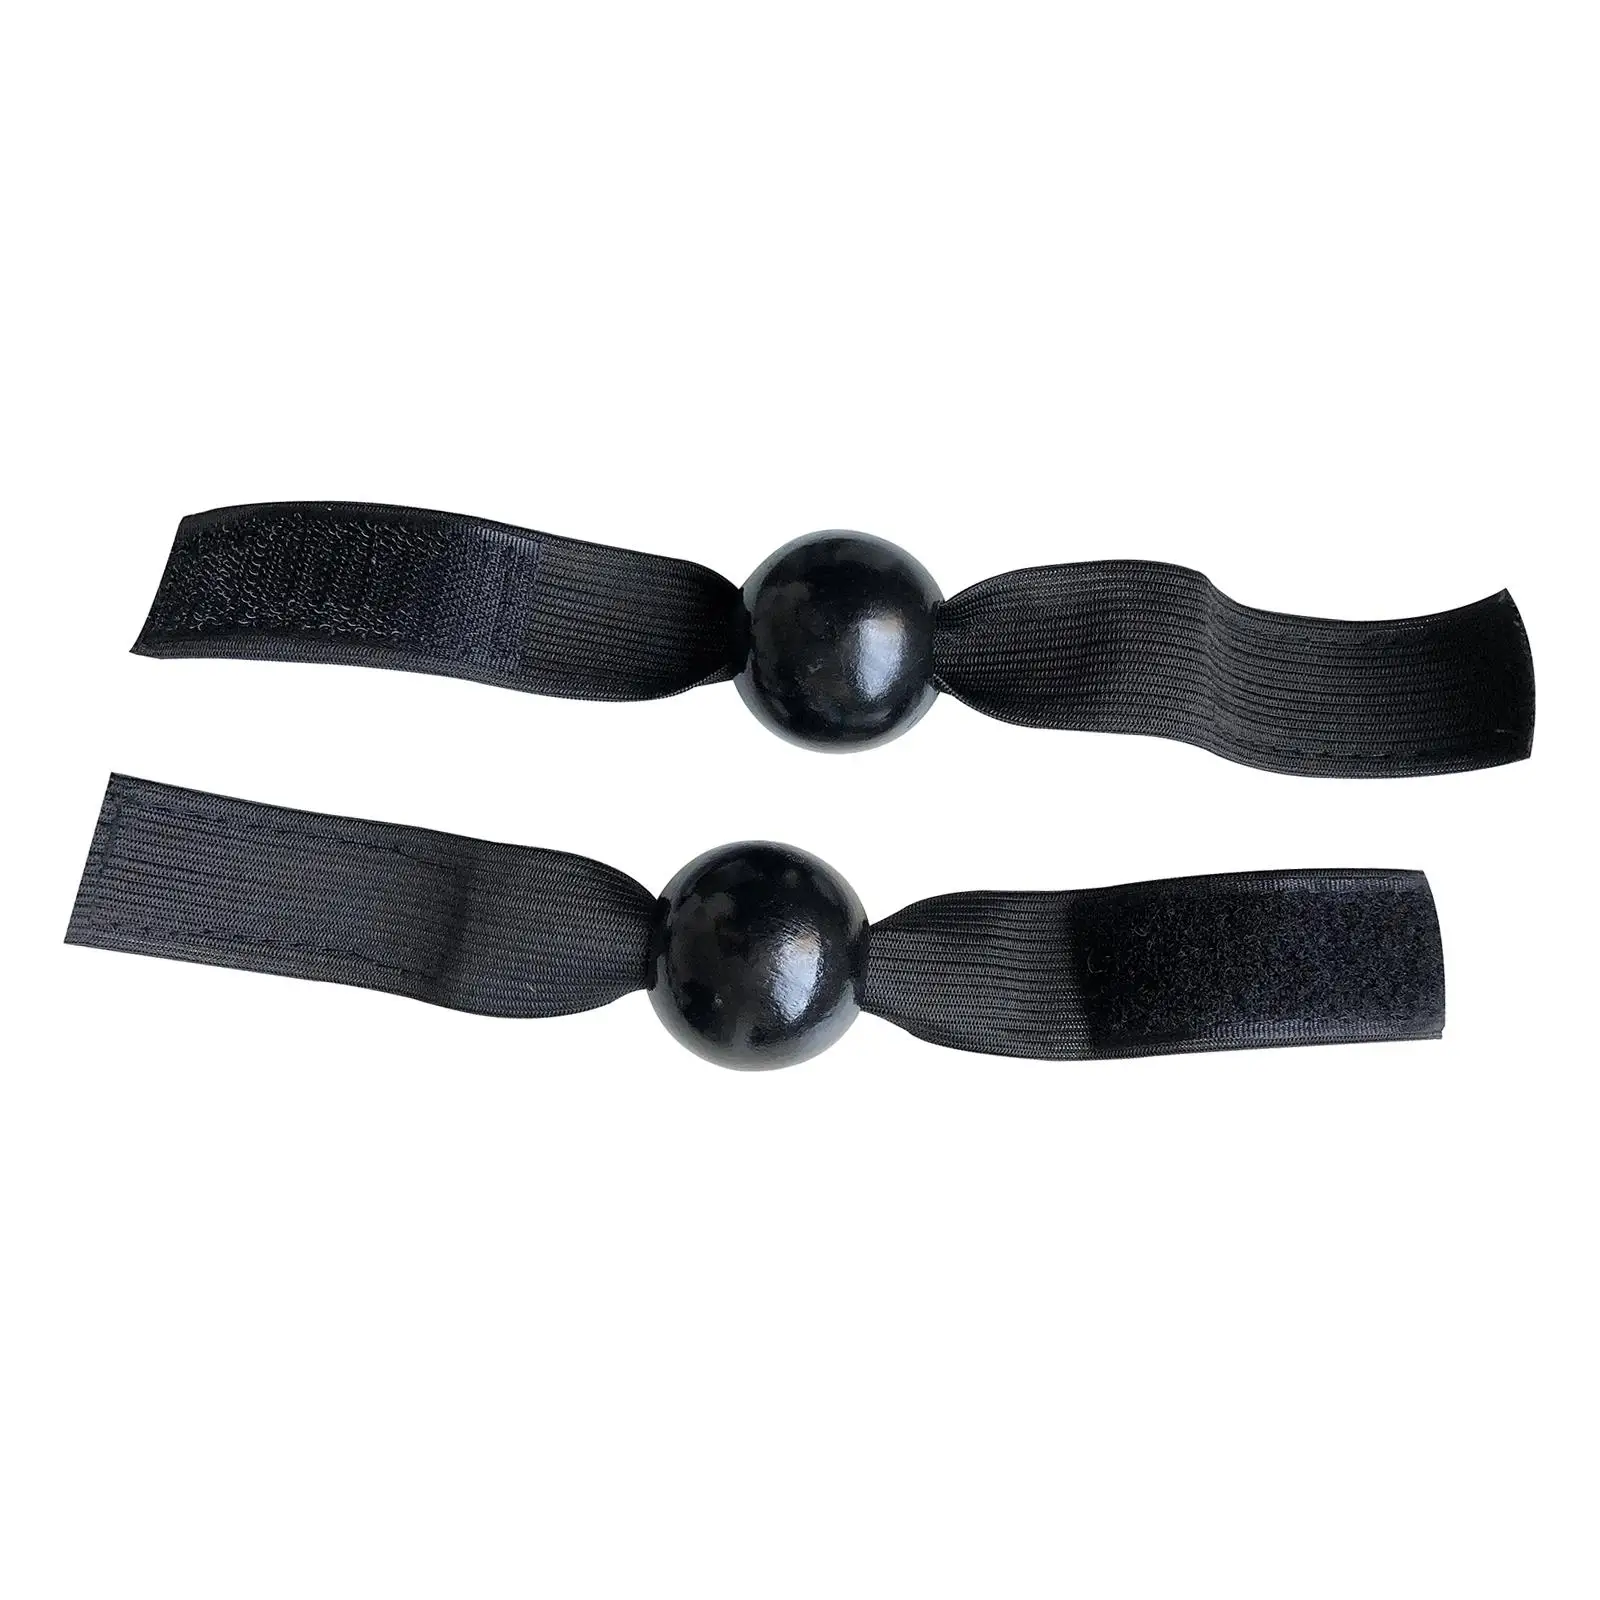 Volleyball Training Band with Adjustable Strap  Knobs - Helping Learn Proper Hand Position ? Fit for Adults  Home Practice